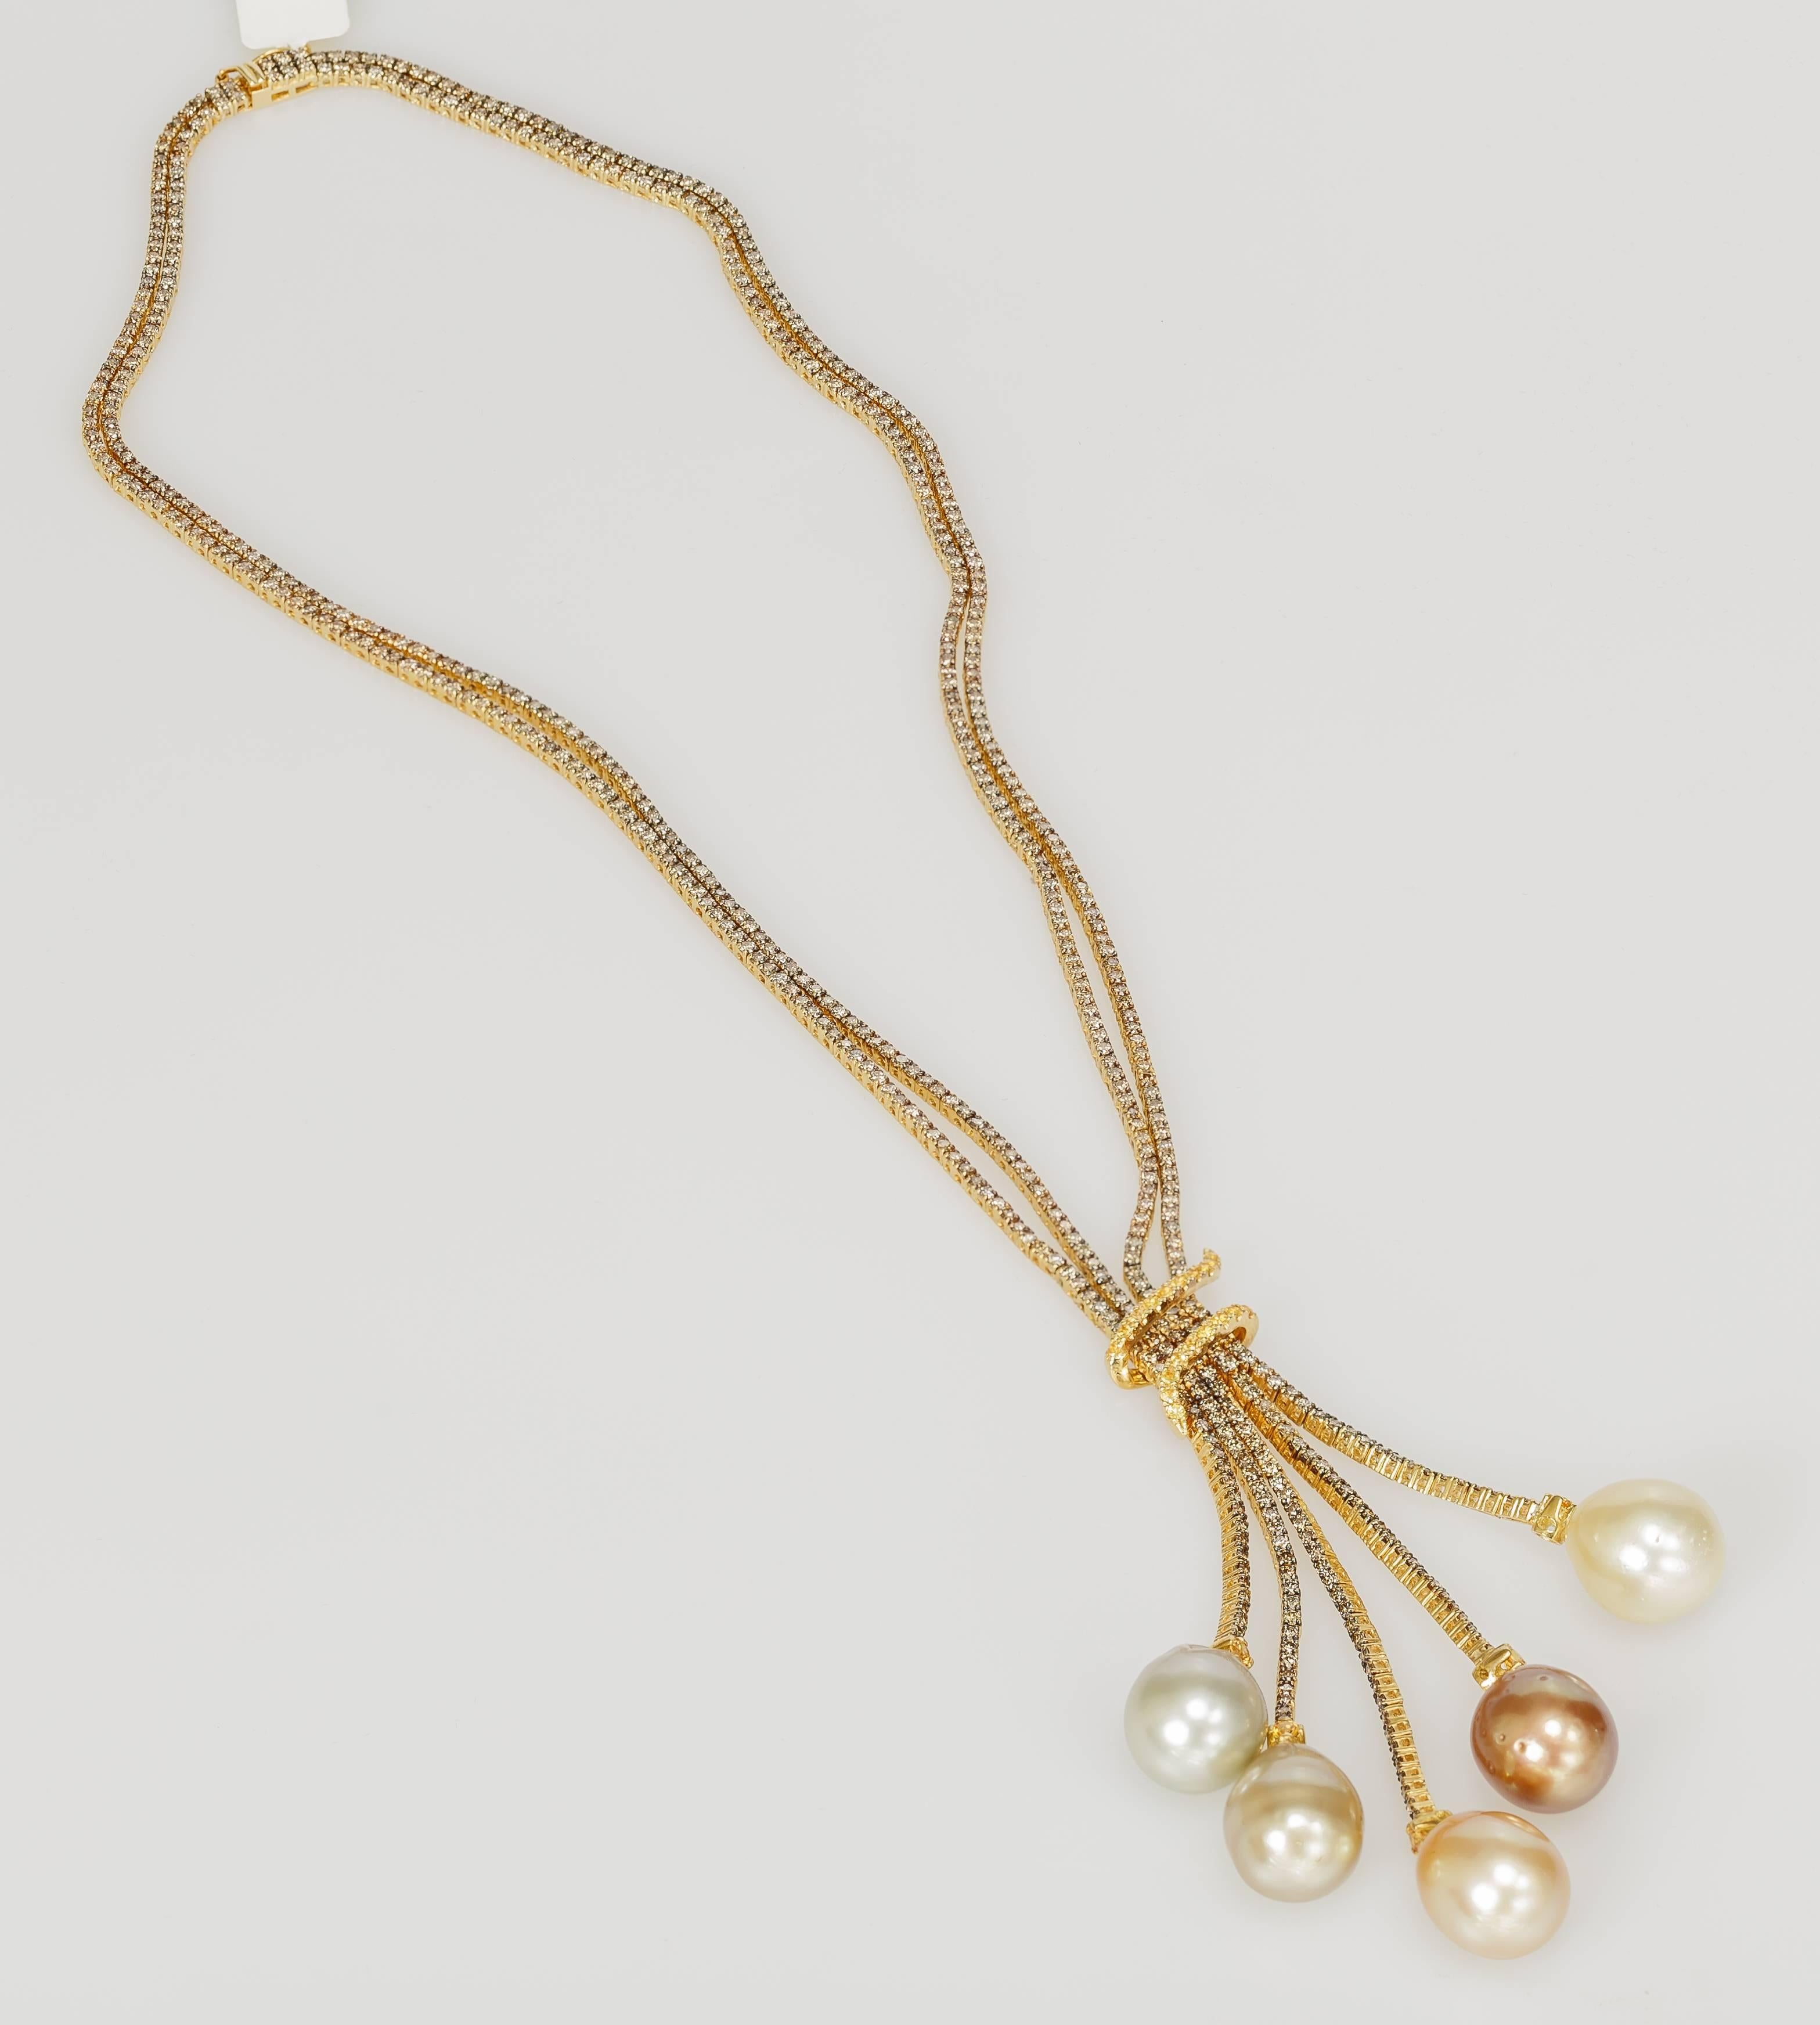 This Yvel necklace features six multicolored pearls hanging from 18k yellow gold. The double chain is set with cognac diamonds totaling 10.83 ct. The orangey-yellow sapphires total 0.49 ct. The pearls measure 13-14.5mm. The chain measures 16 inches